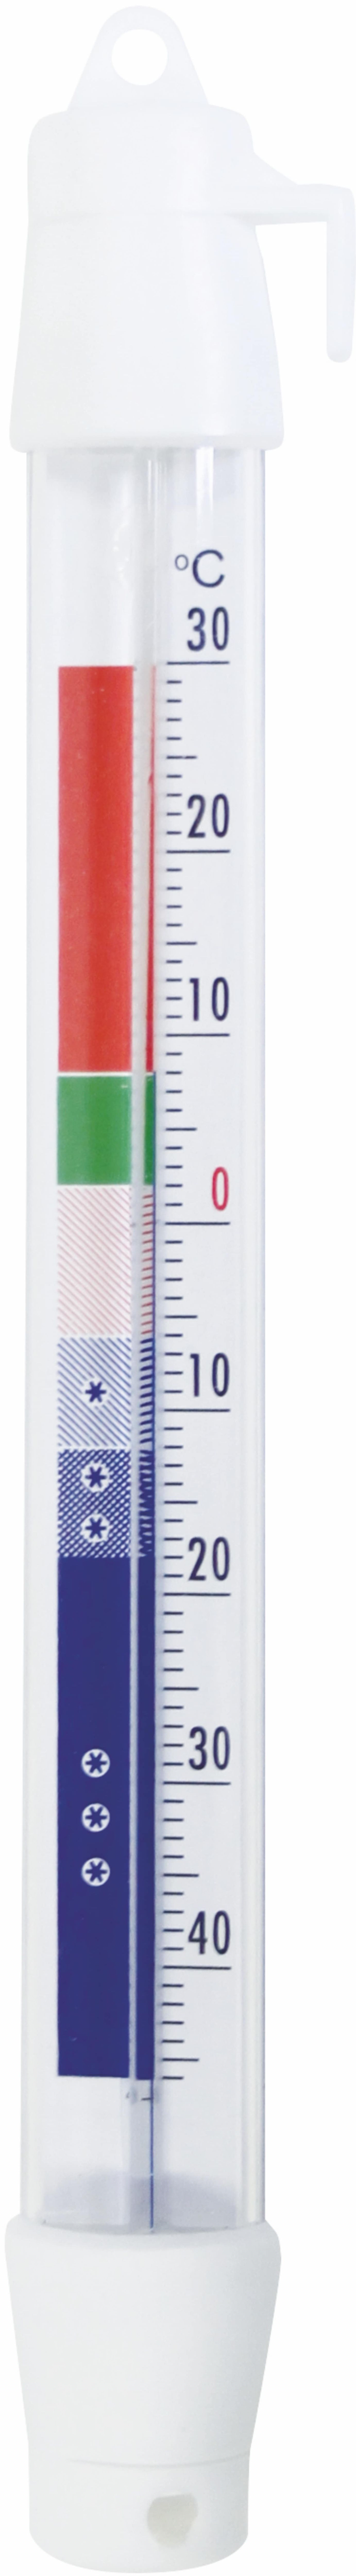 Thermometer 160034 160034